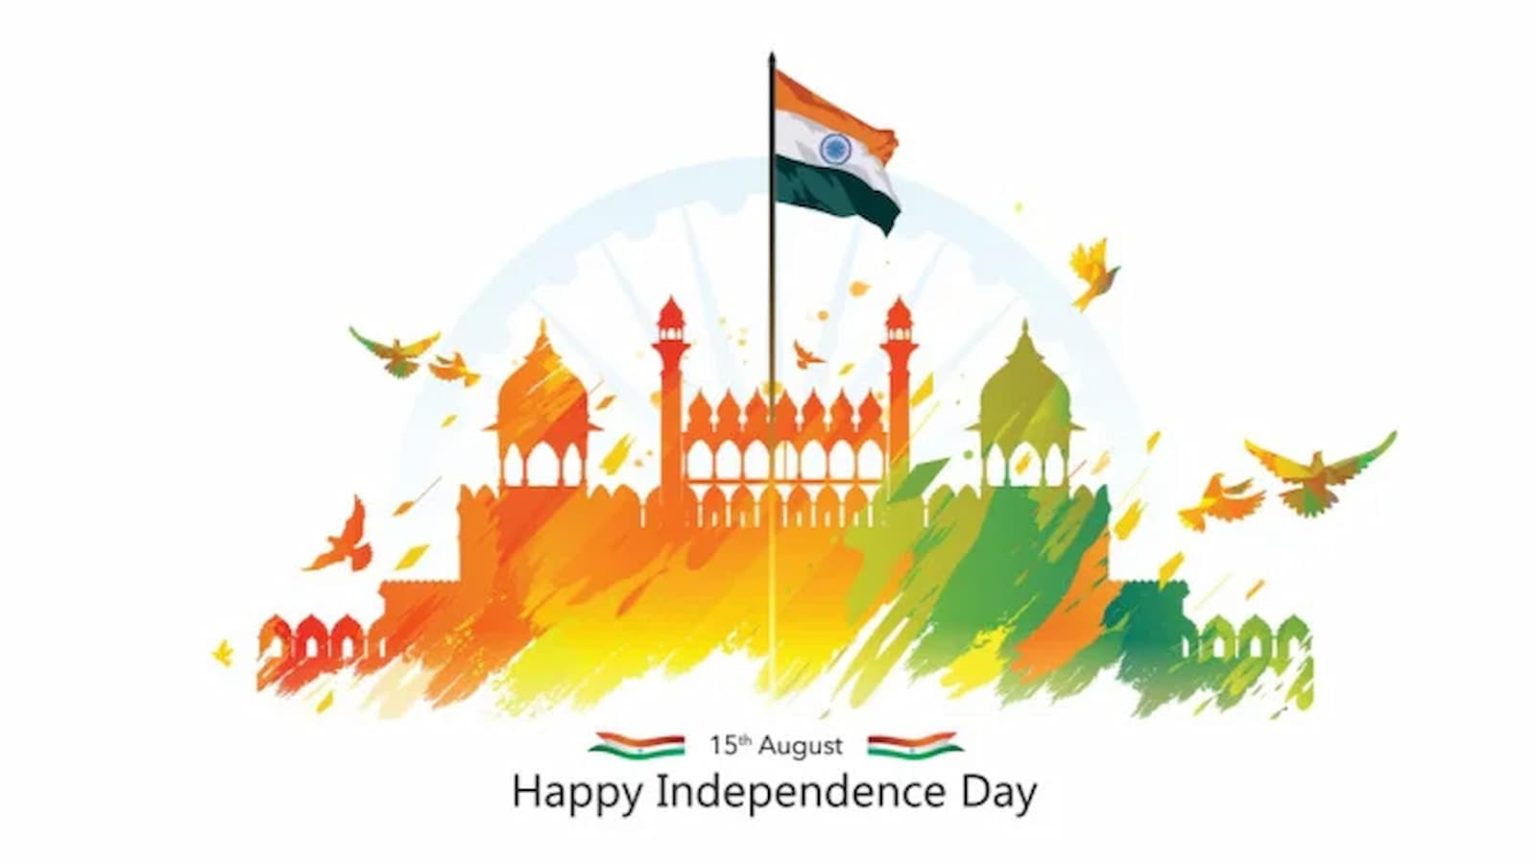 77th Independence Day Independence Day Speech Ideas for Students